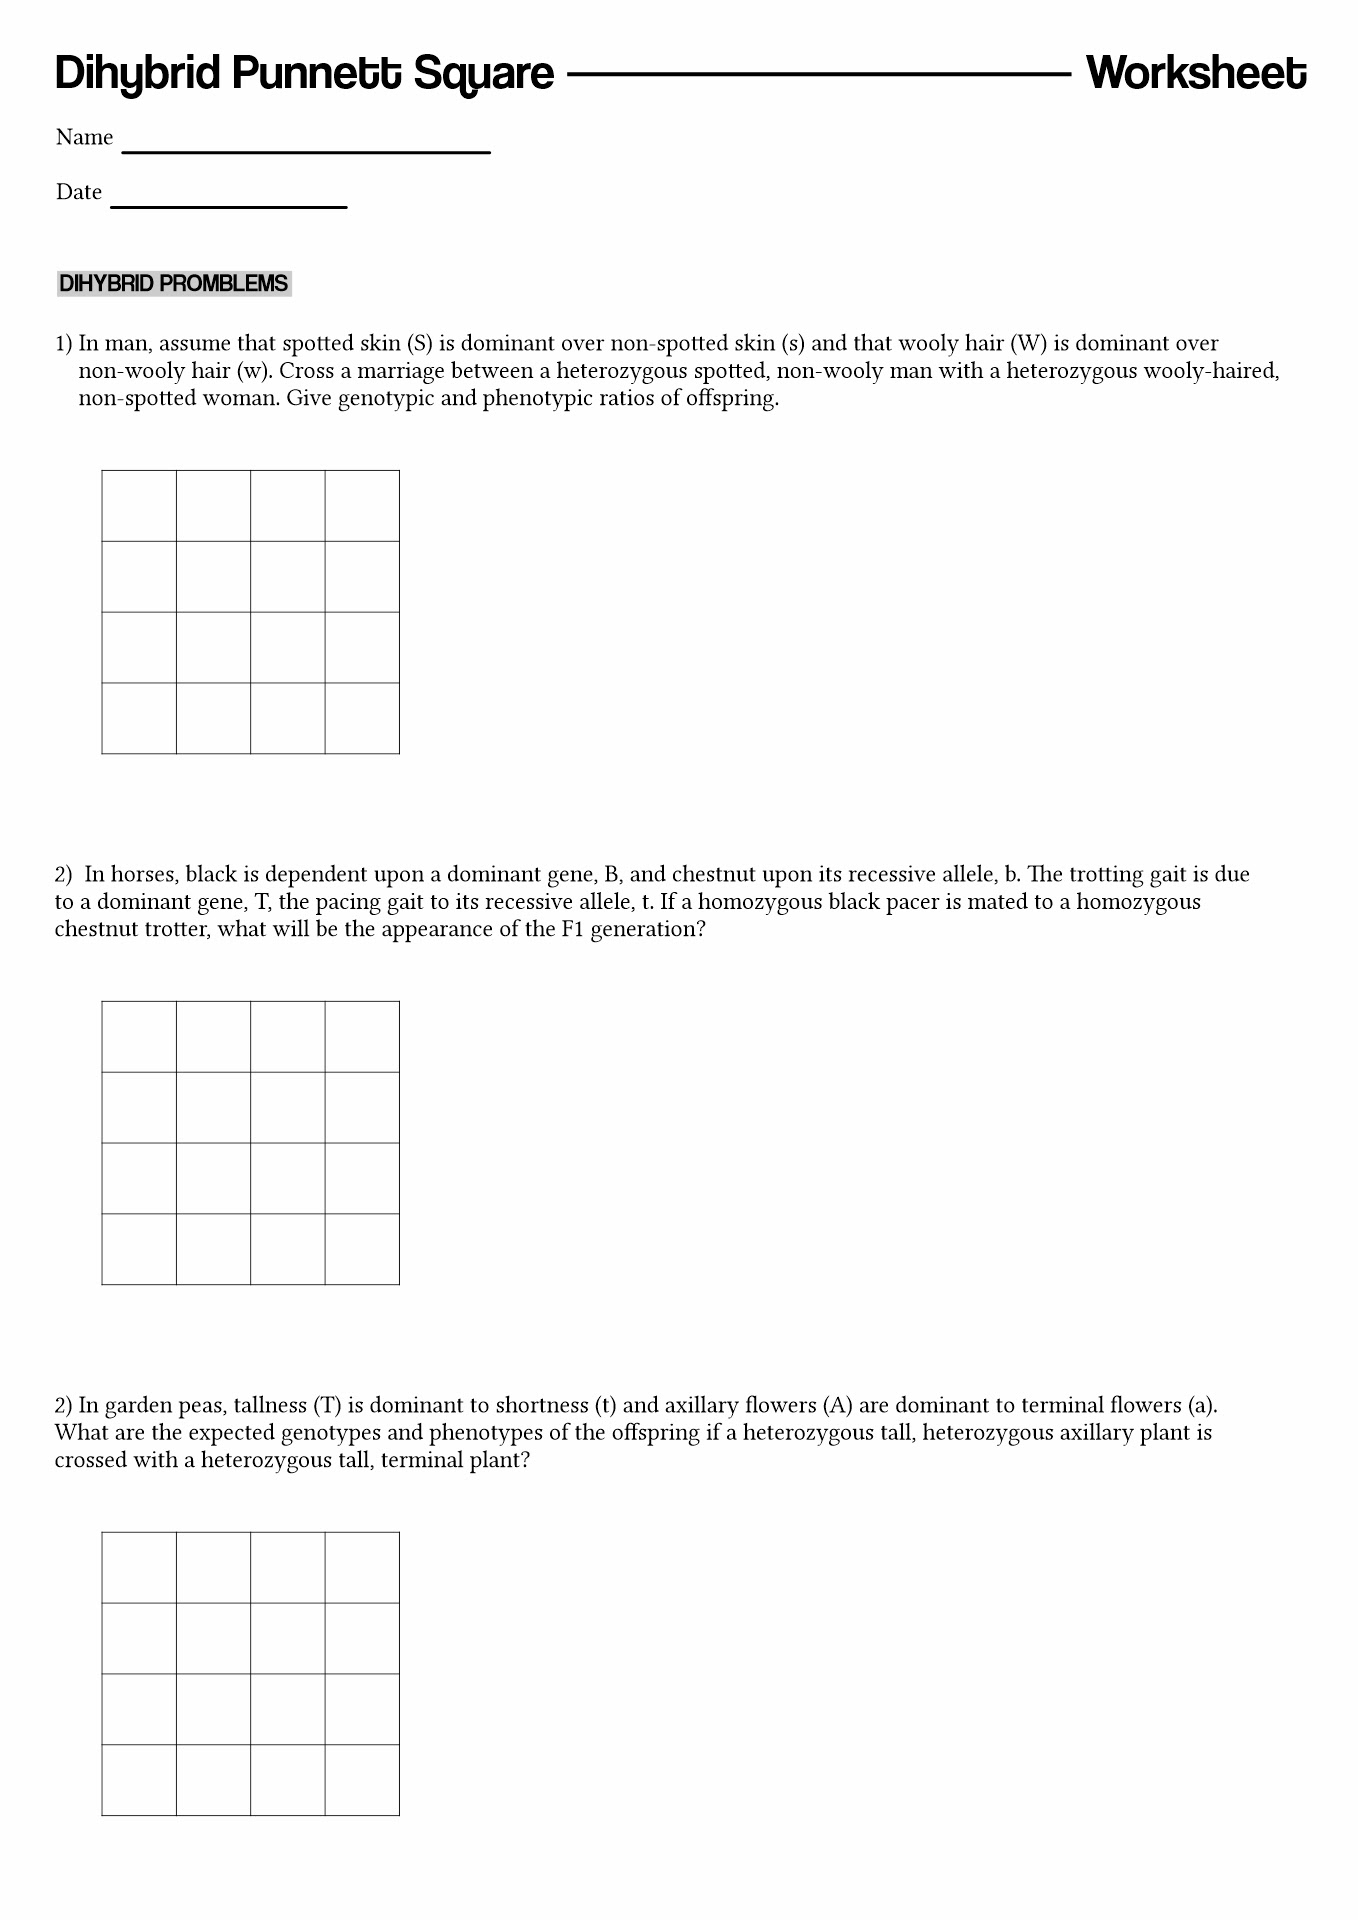 15-best-images-of-punnett-square-worksheet-answer-key-worksheet-template-tips-and-reviews